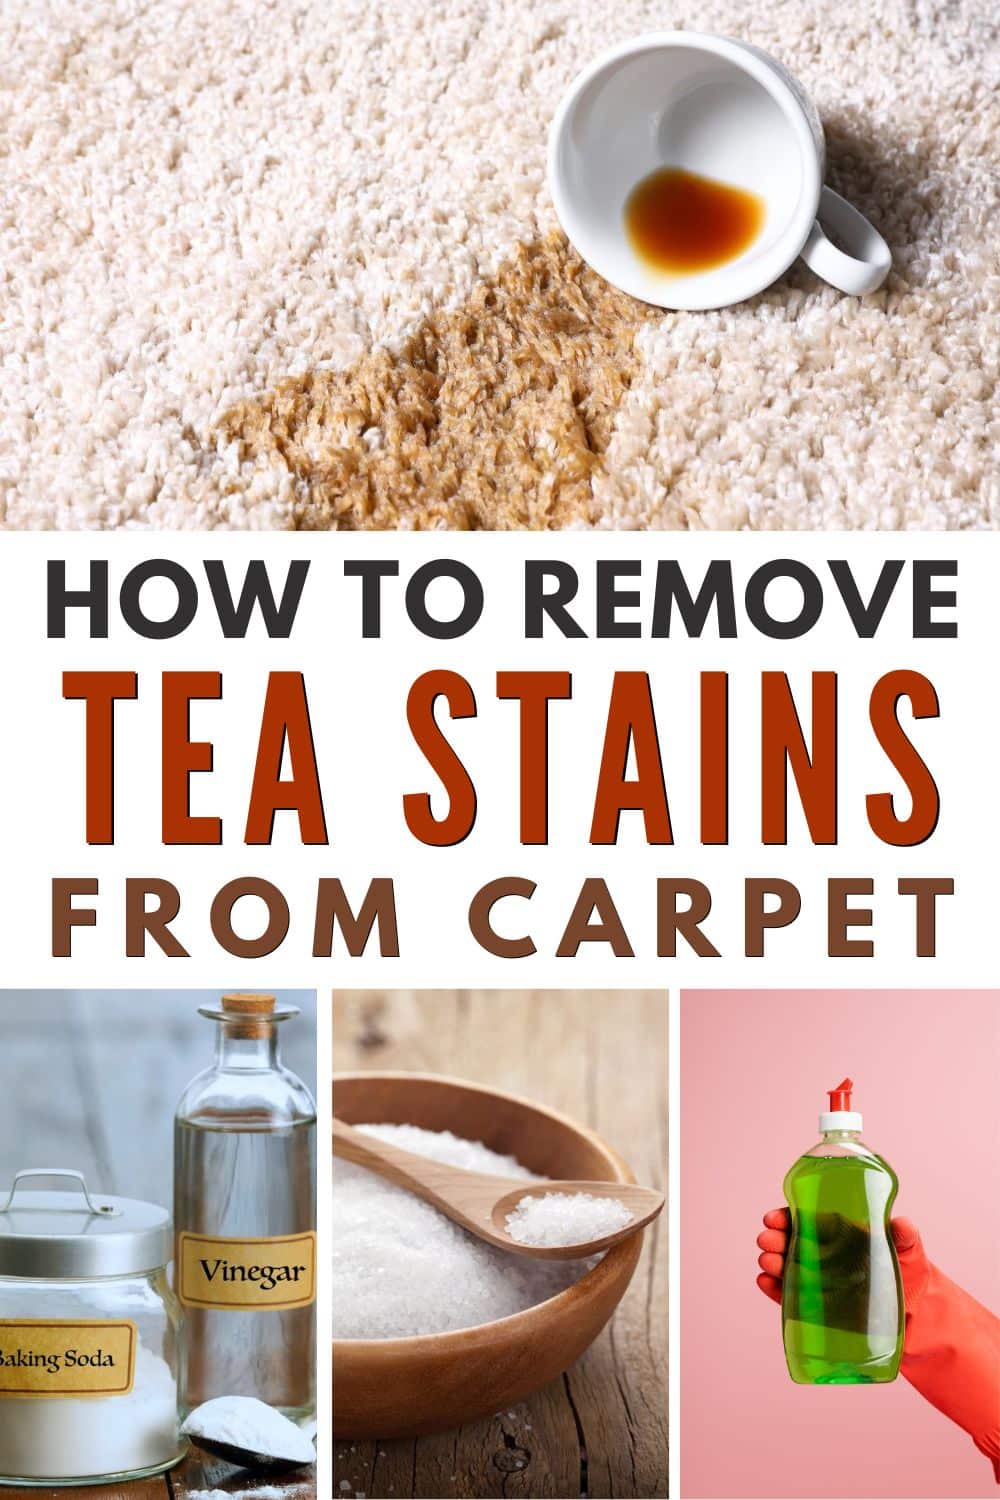 Discover effective methods to remove tea stains from your carpet using simple techniques.